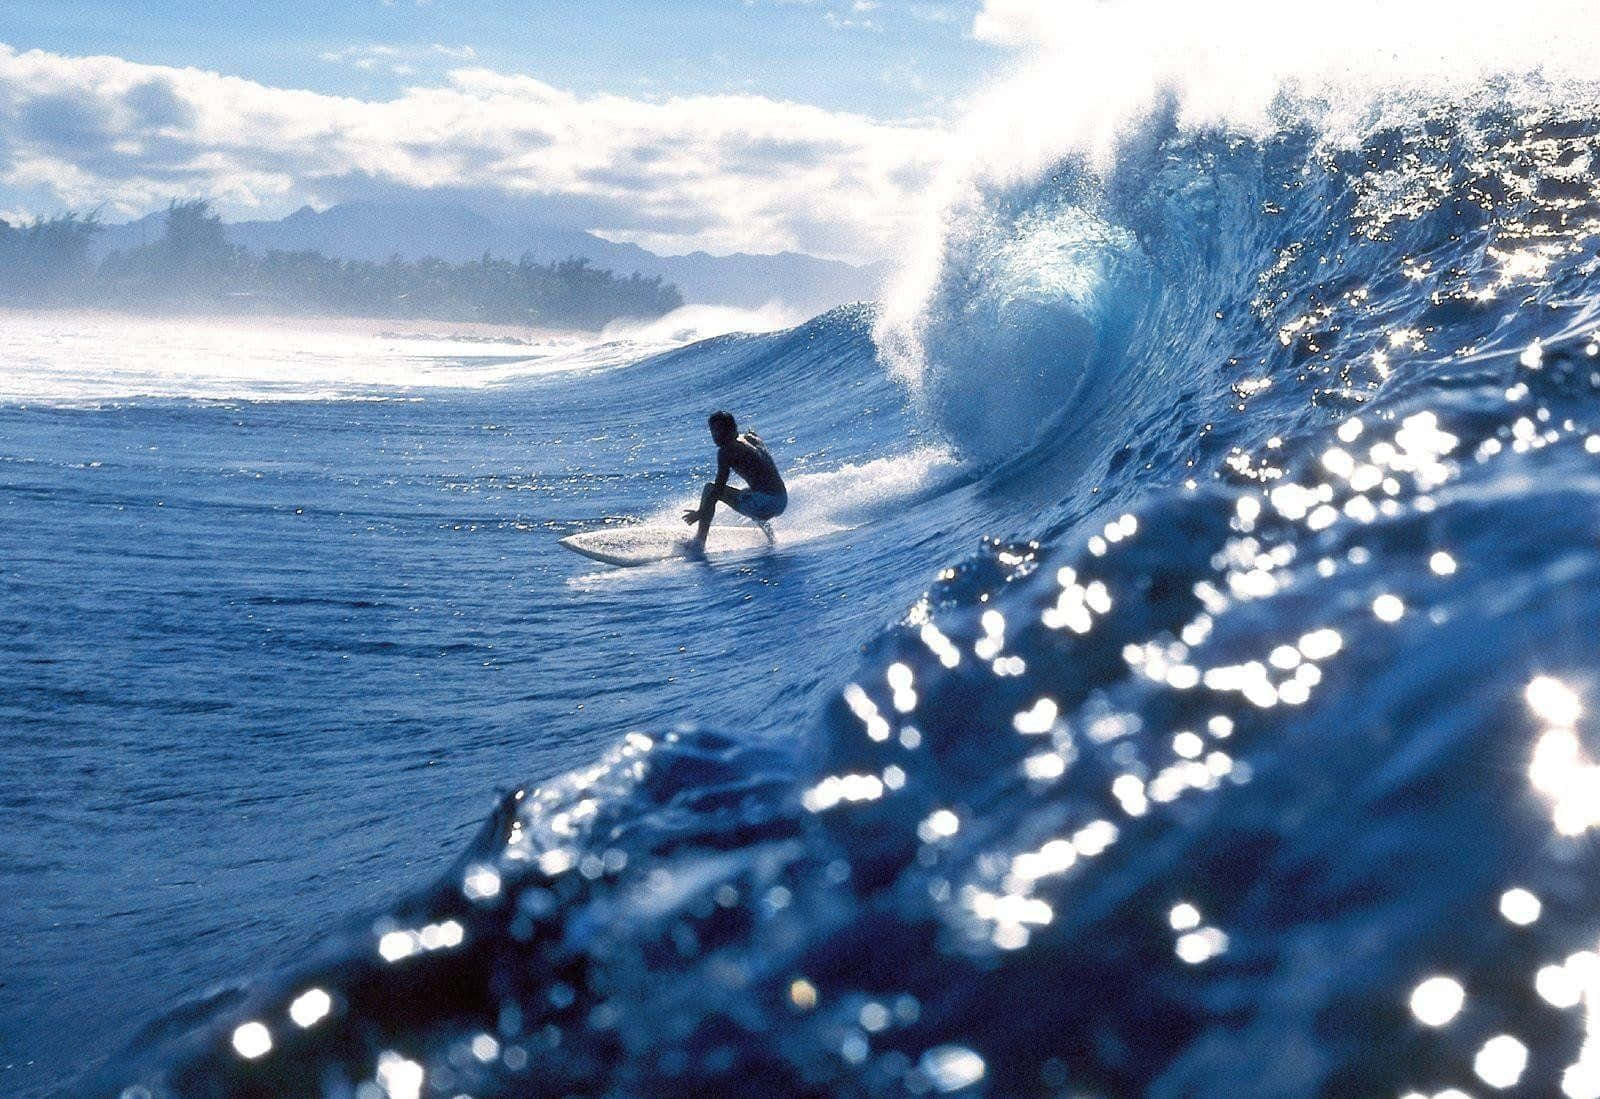 Surfing an endless wave